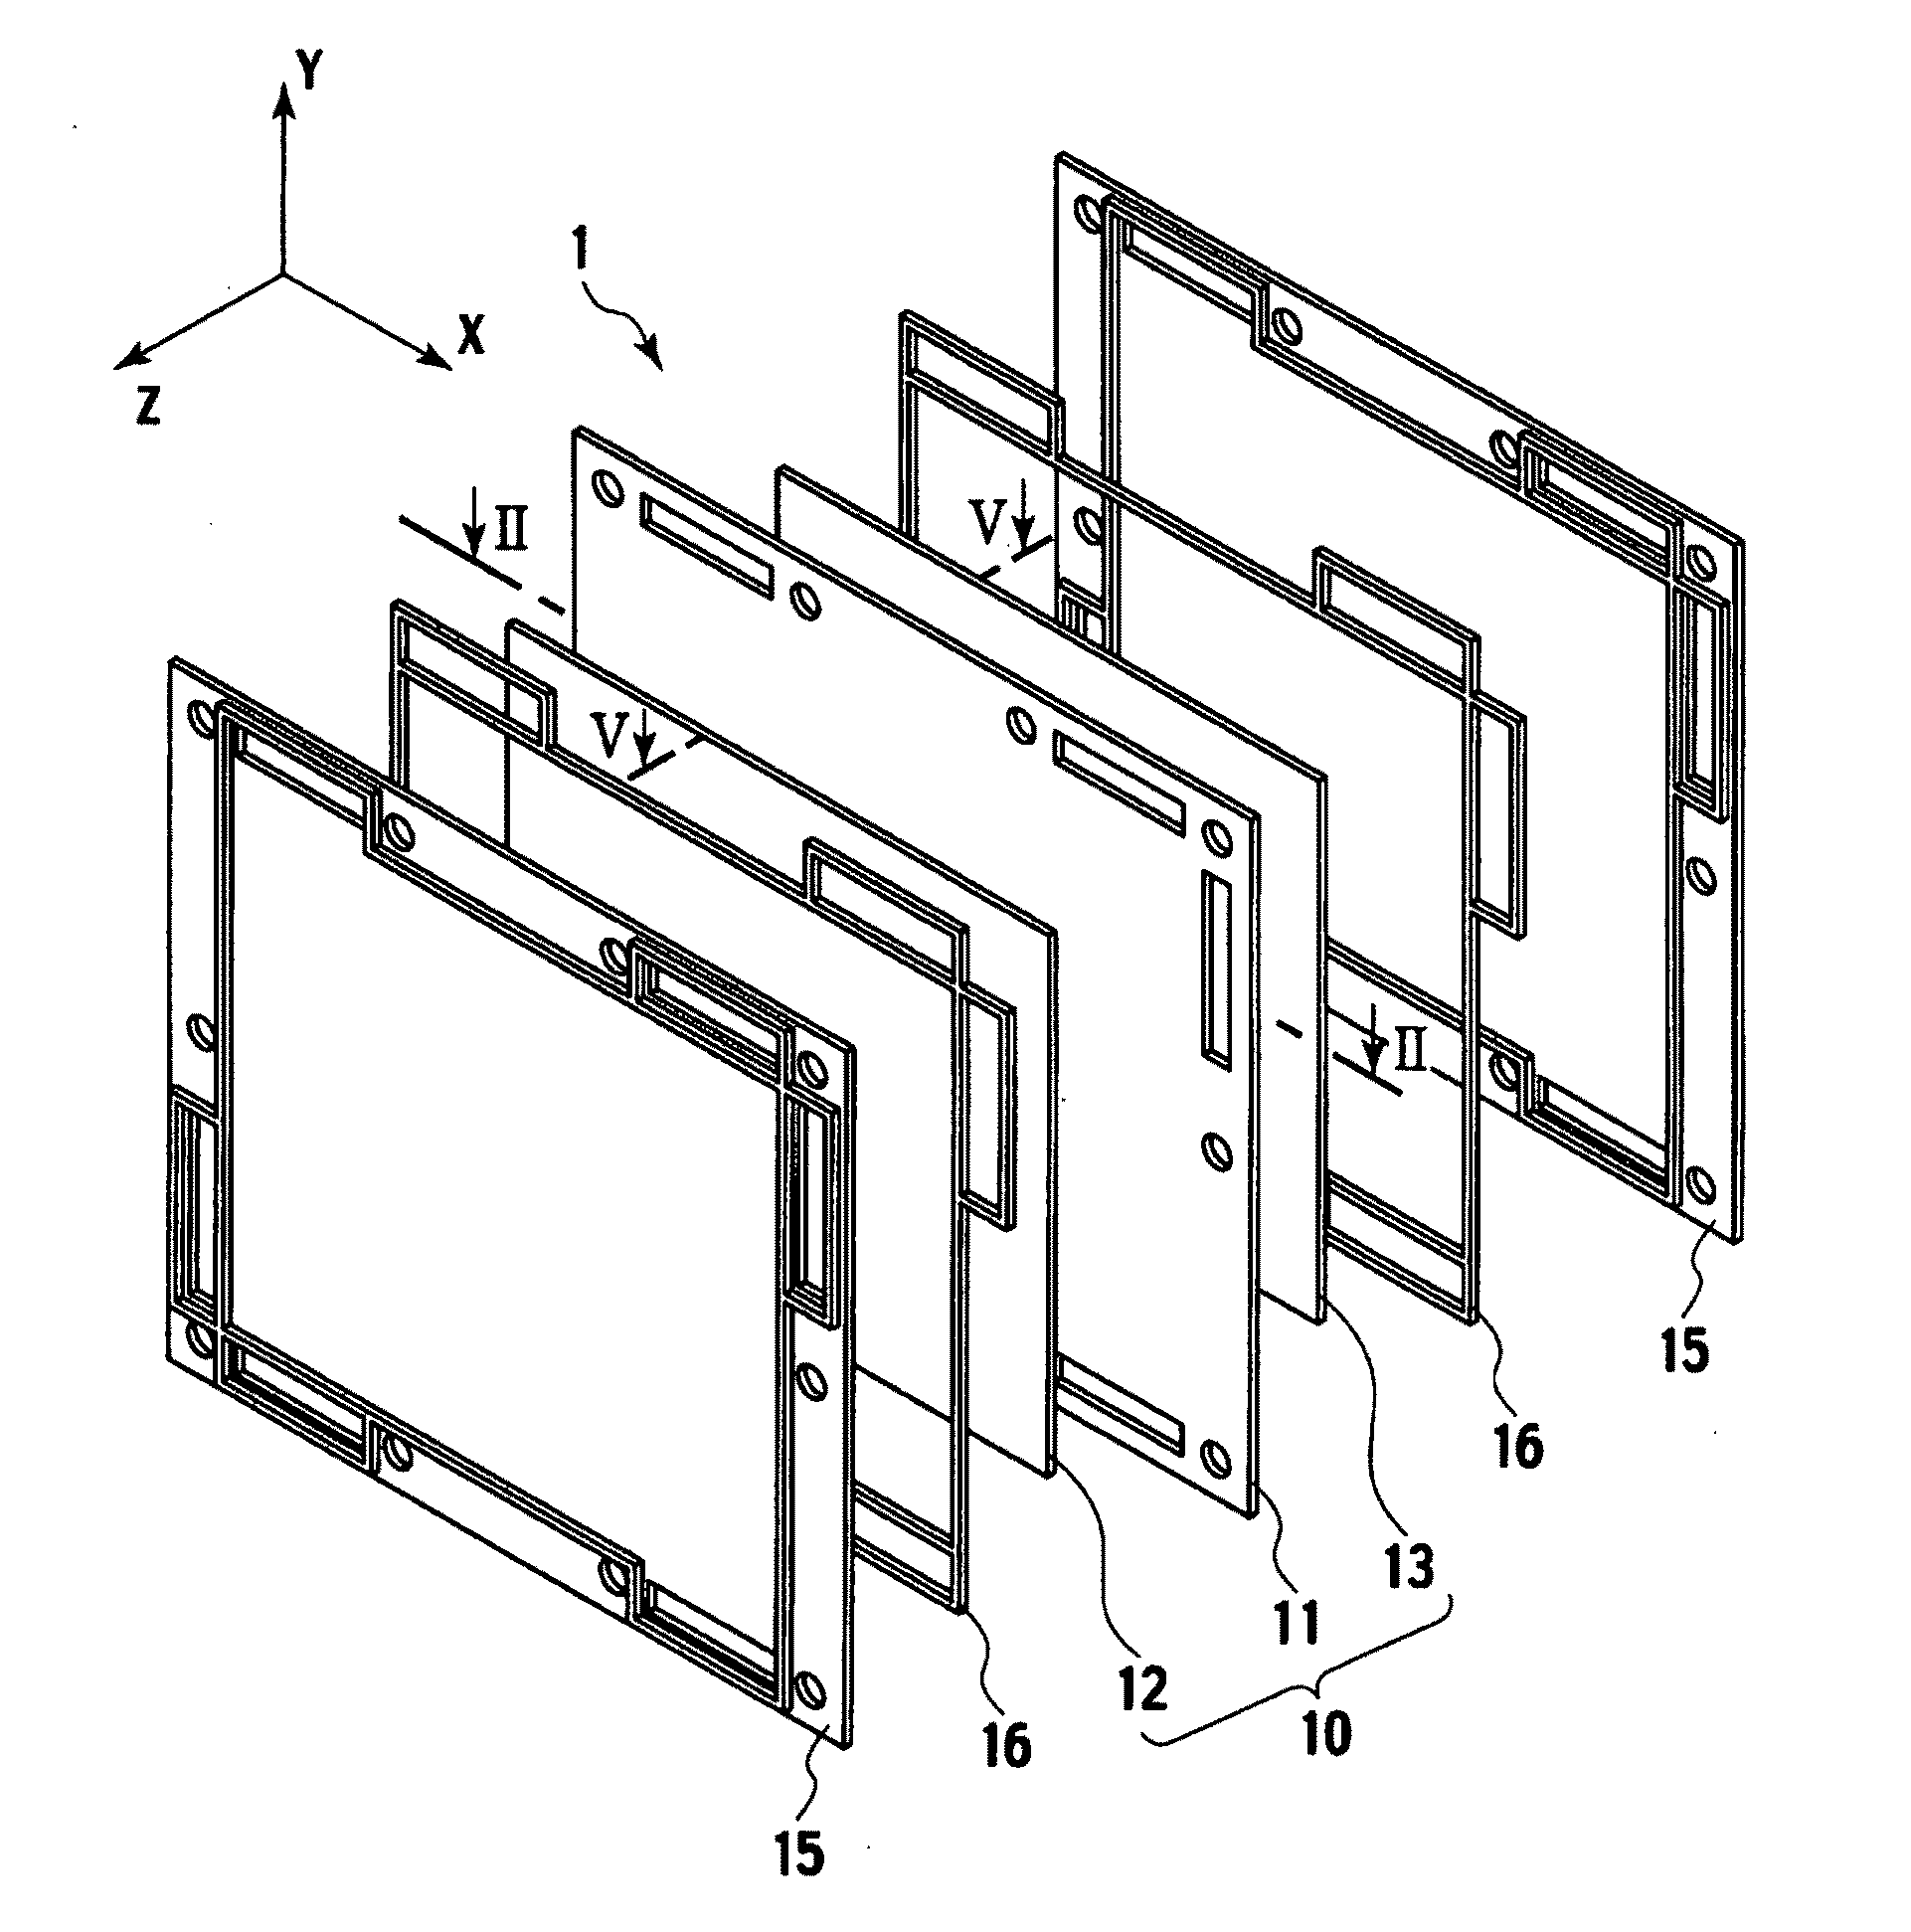 Electrolyte membrane and membrane electrode assembly using the same